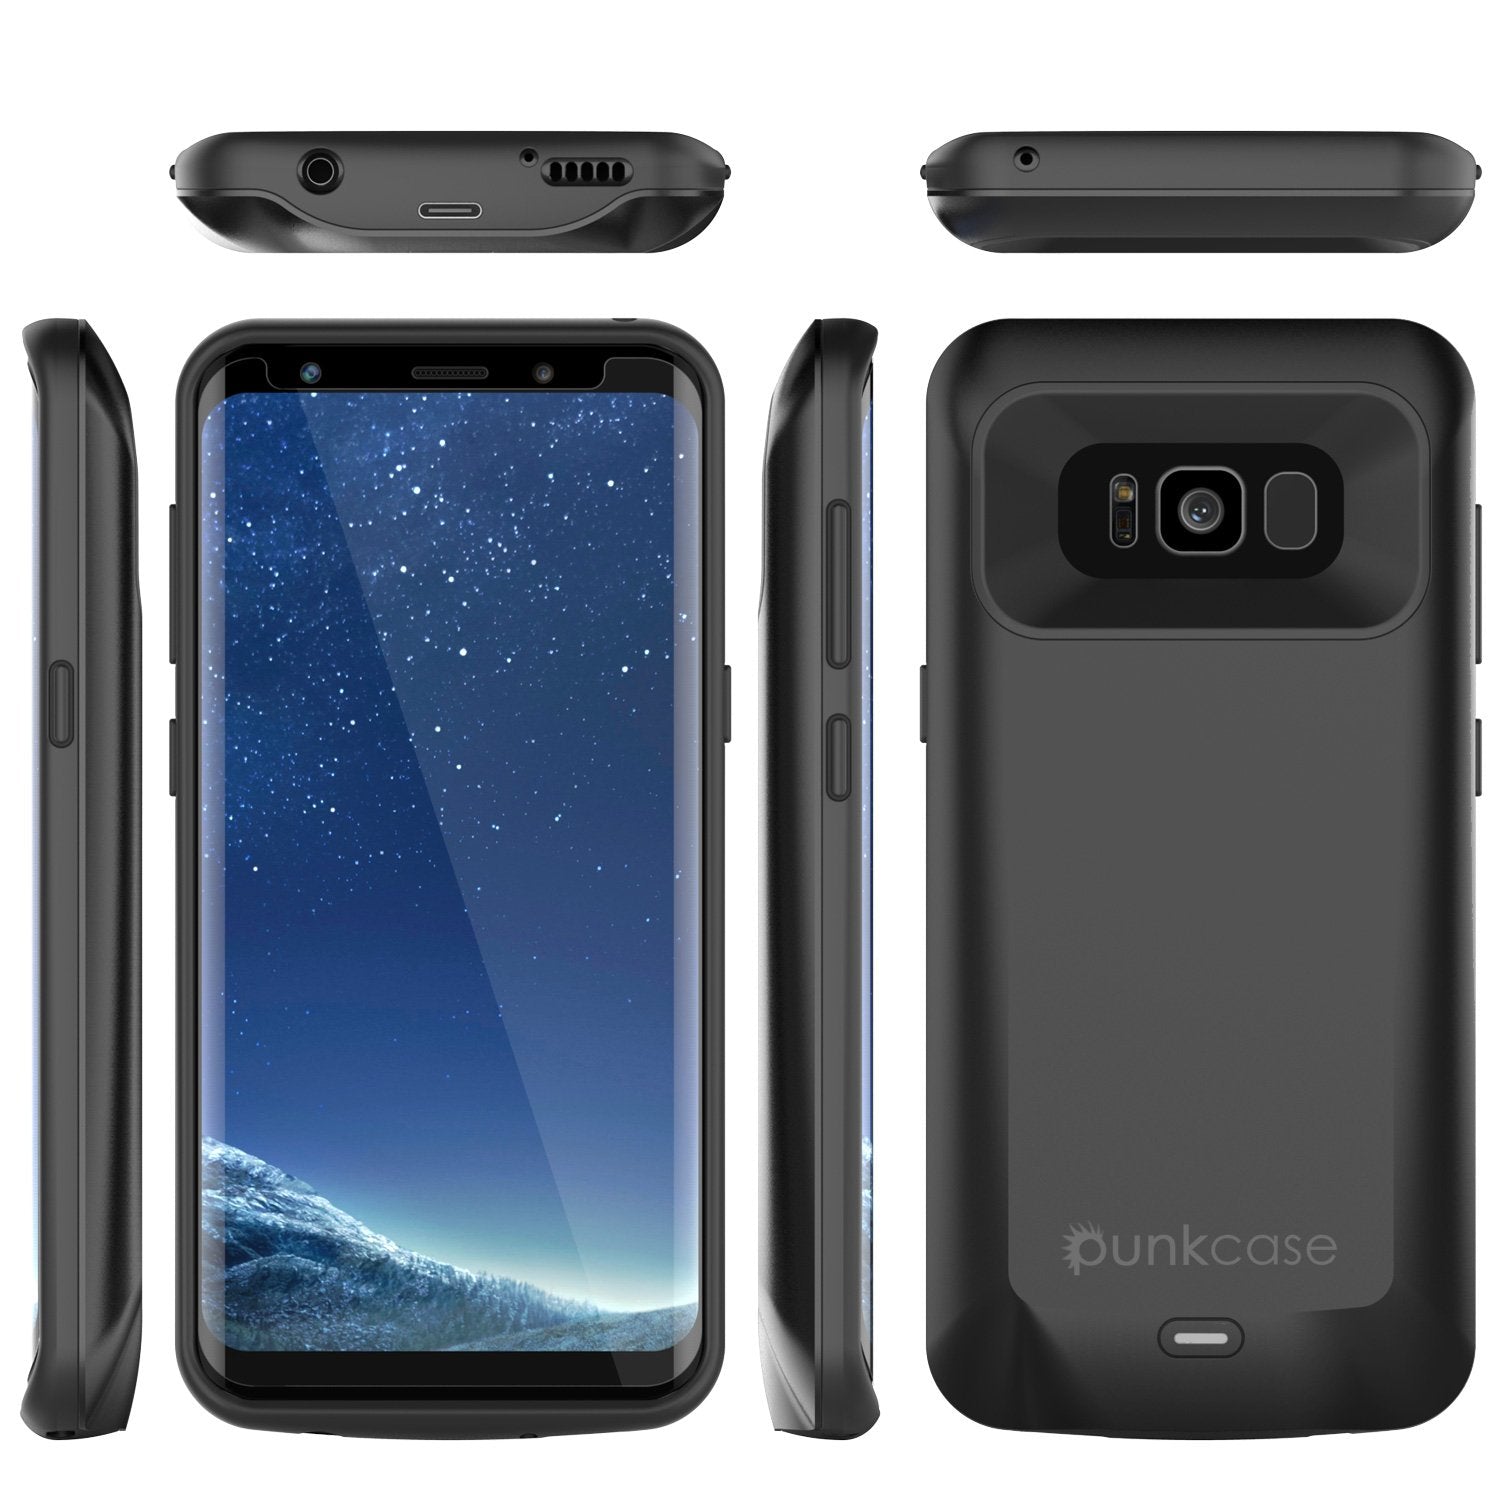 Galaxy S8 Battery Case, Punkcase 5000mAH Charger Black Case